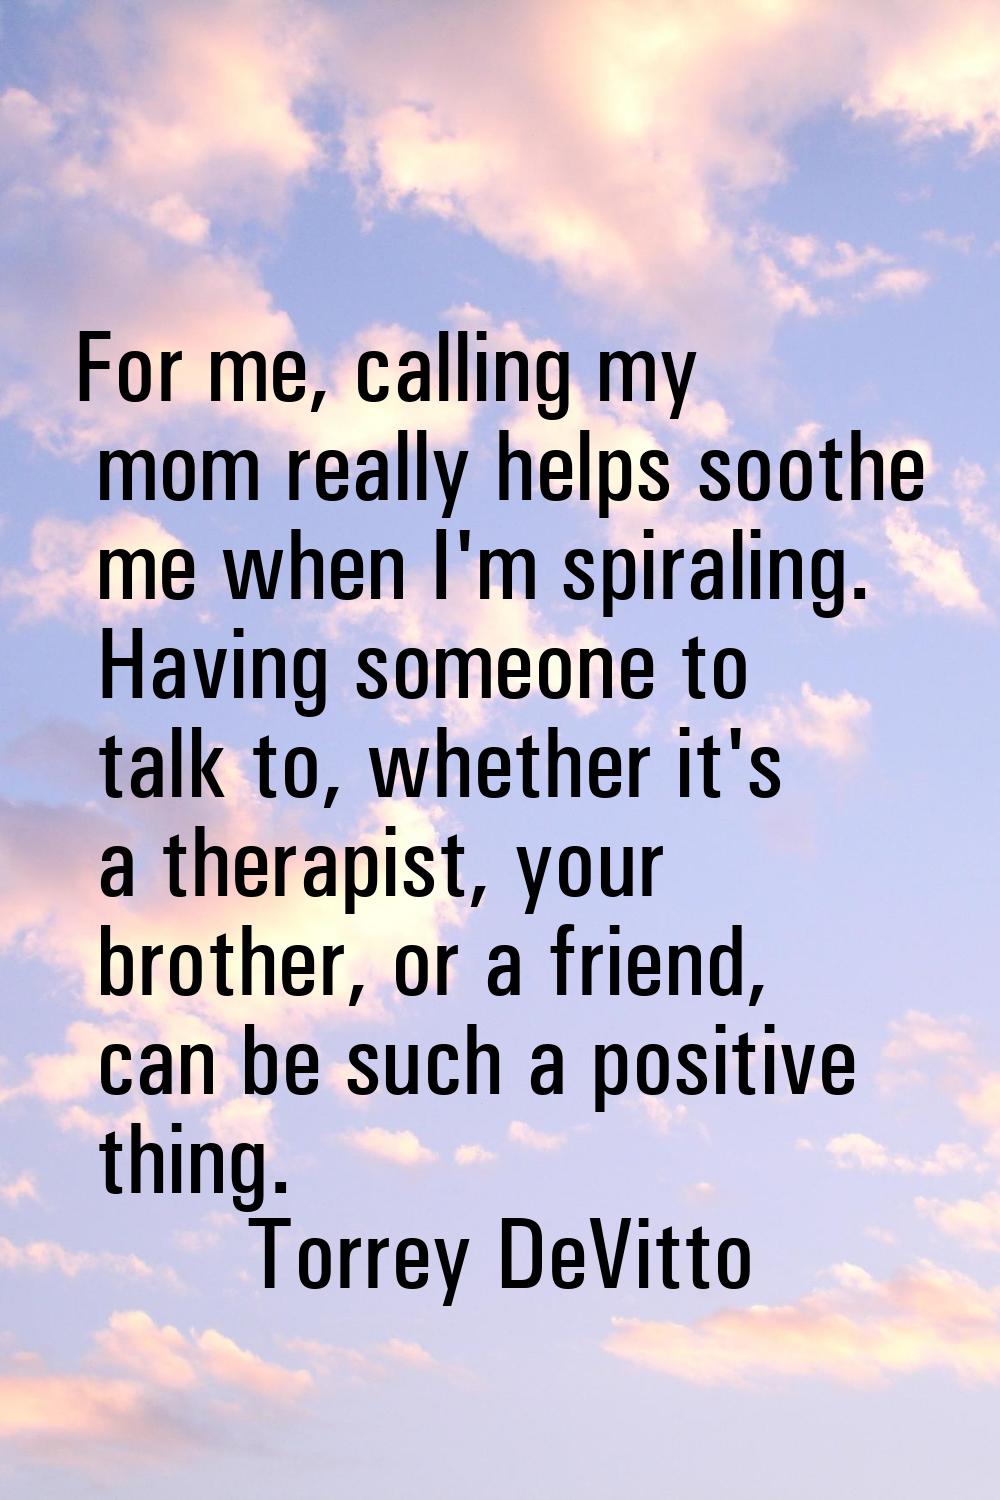 For me, calling my mom really helps soothe me when I'm spiraling. Having someone to talk to, whethe